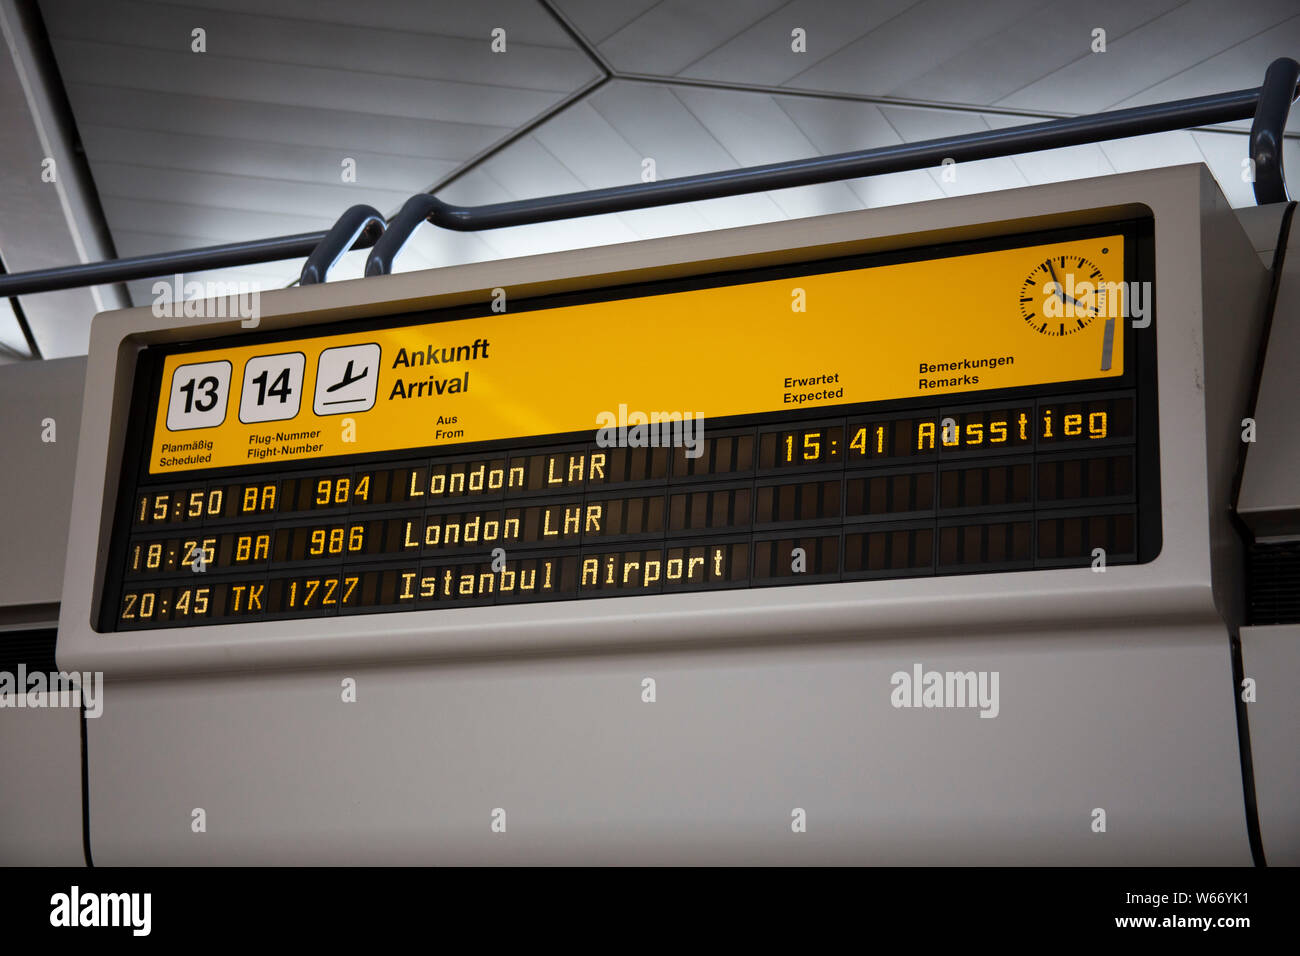 Arrivals board at Berlin airport Stock Photo